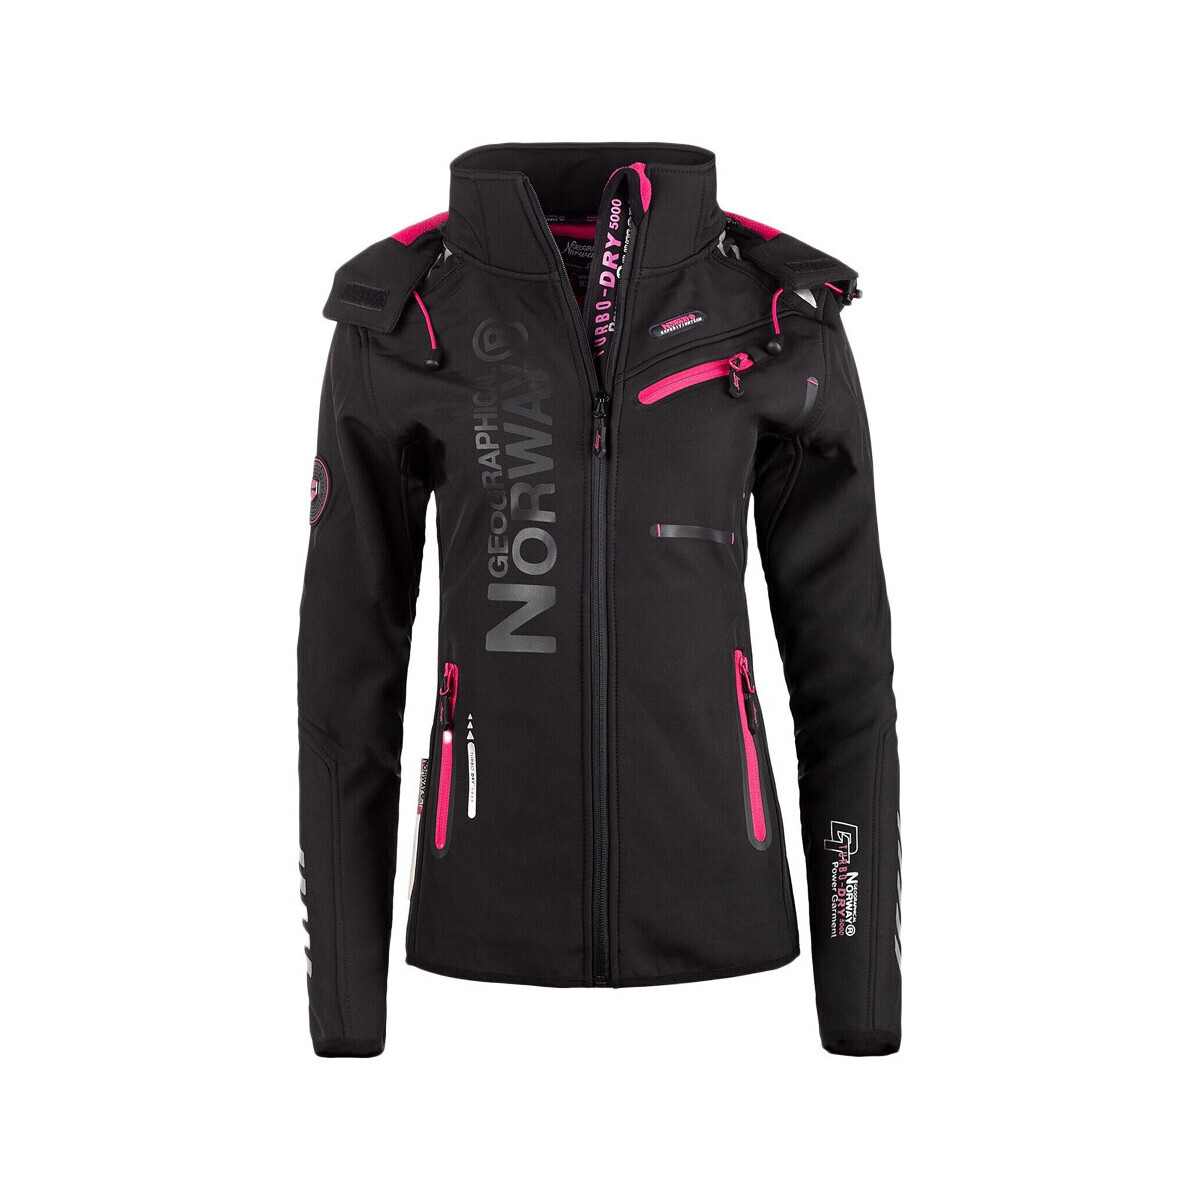 Textil Mulher Casacos  Geographical Norway  Preto